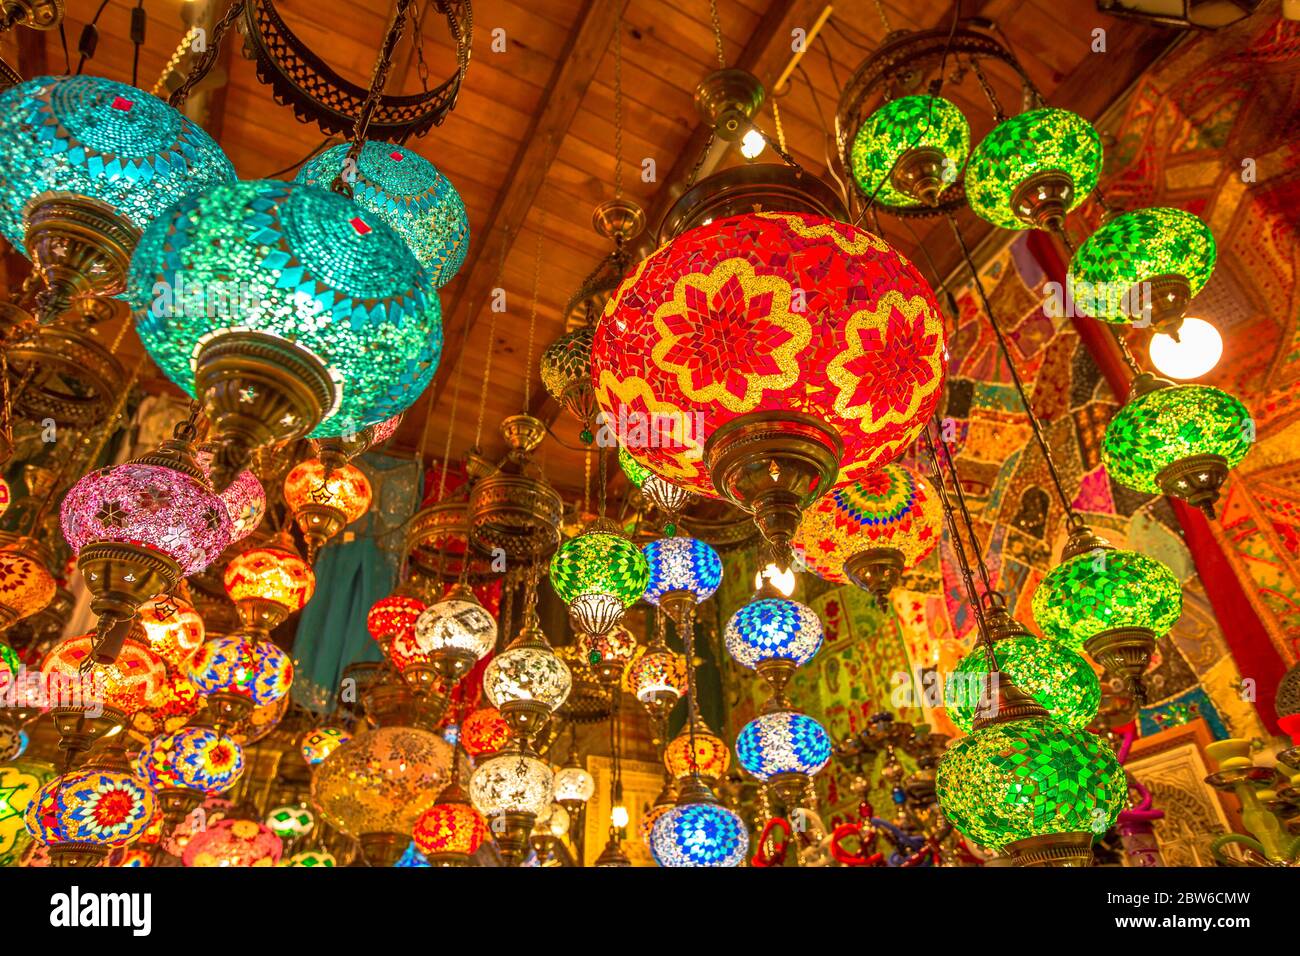 Vintage Moroccan Lanterns High Resolution Stock Photography and Images -  Alamy